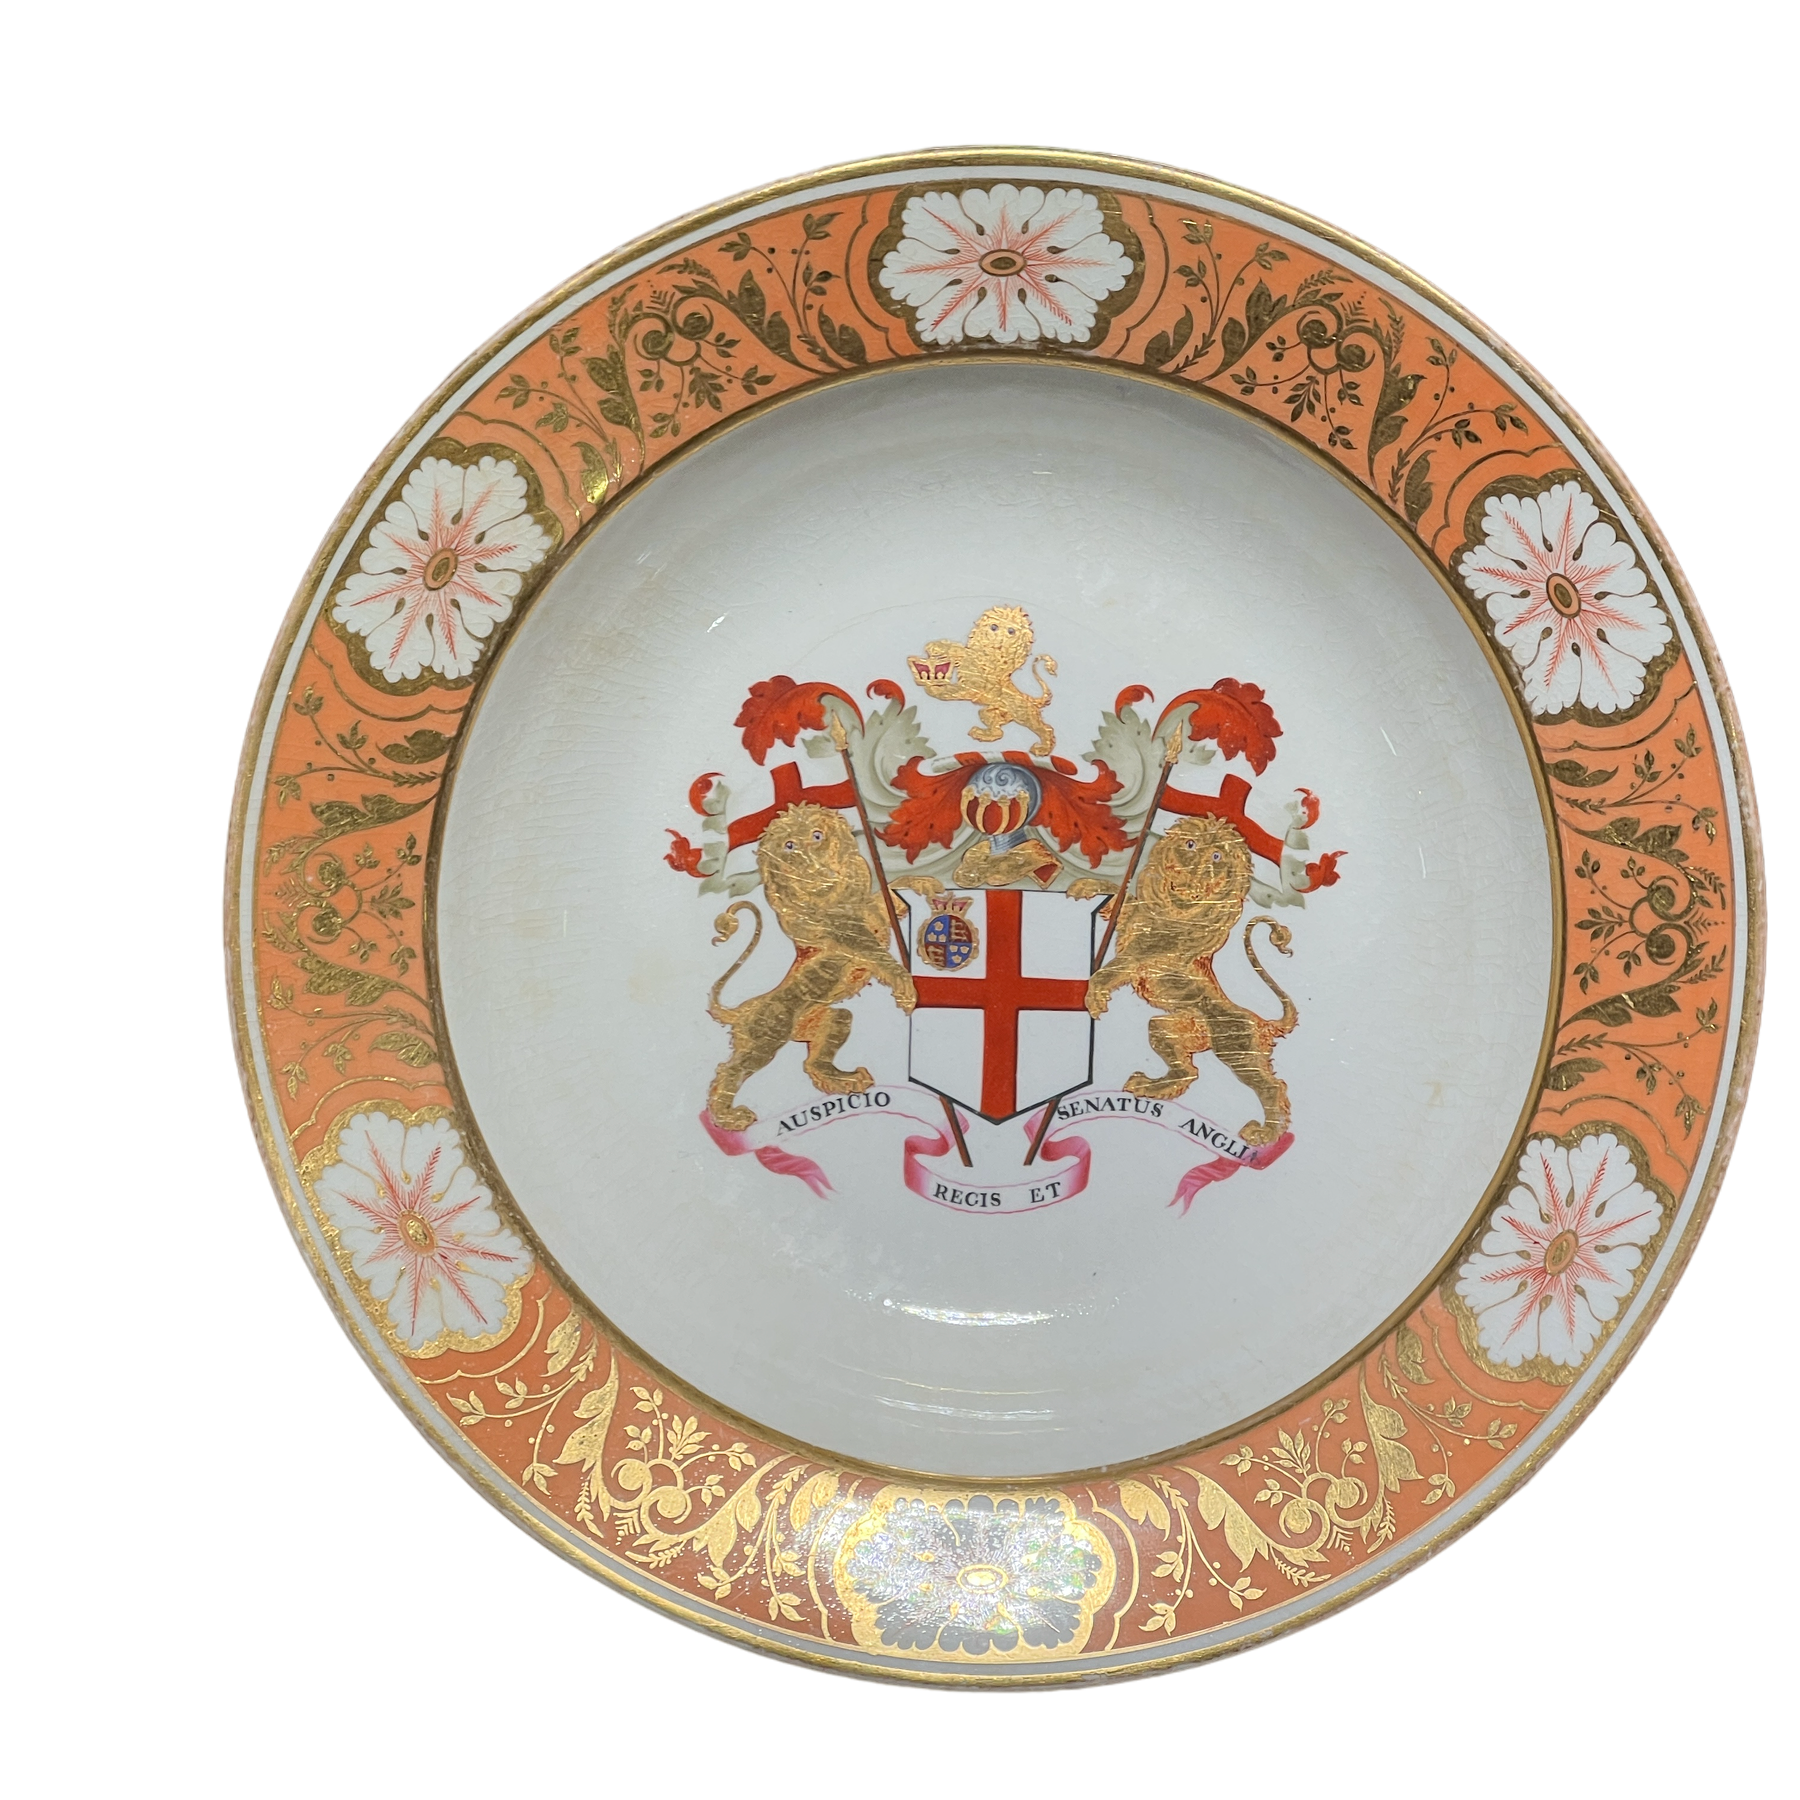 East India Company plate, Chamberlain's Worcester, 1807